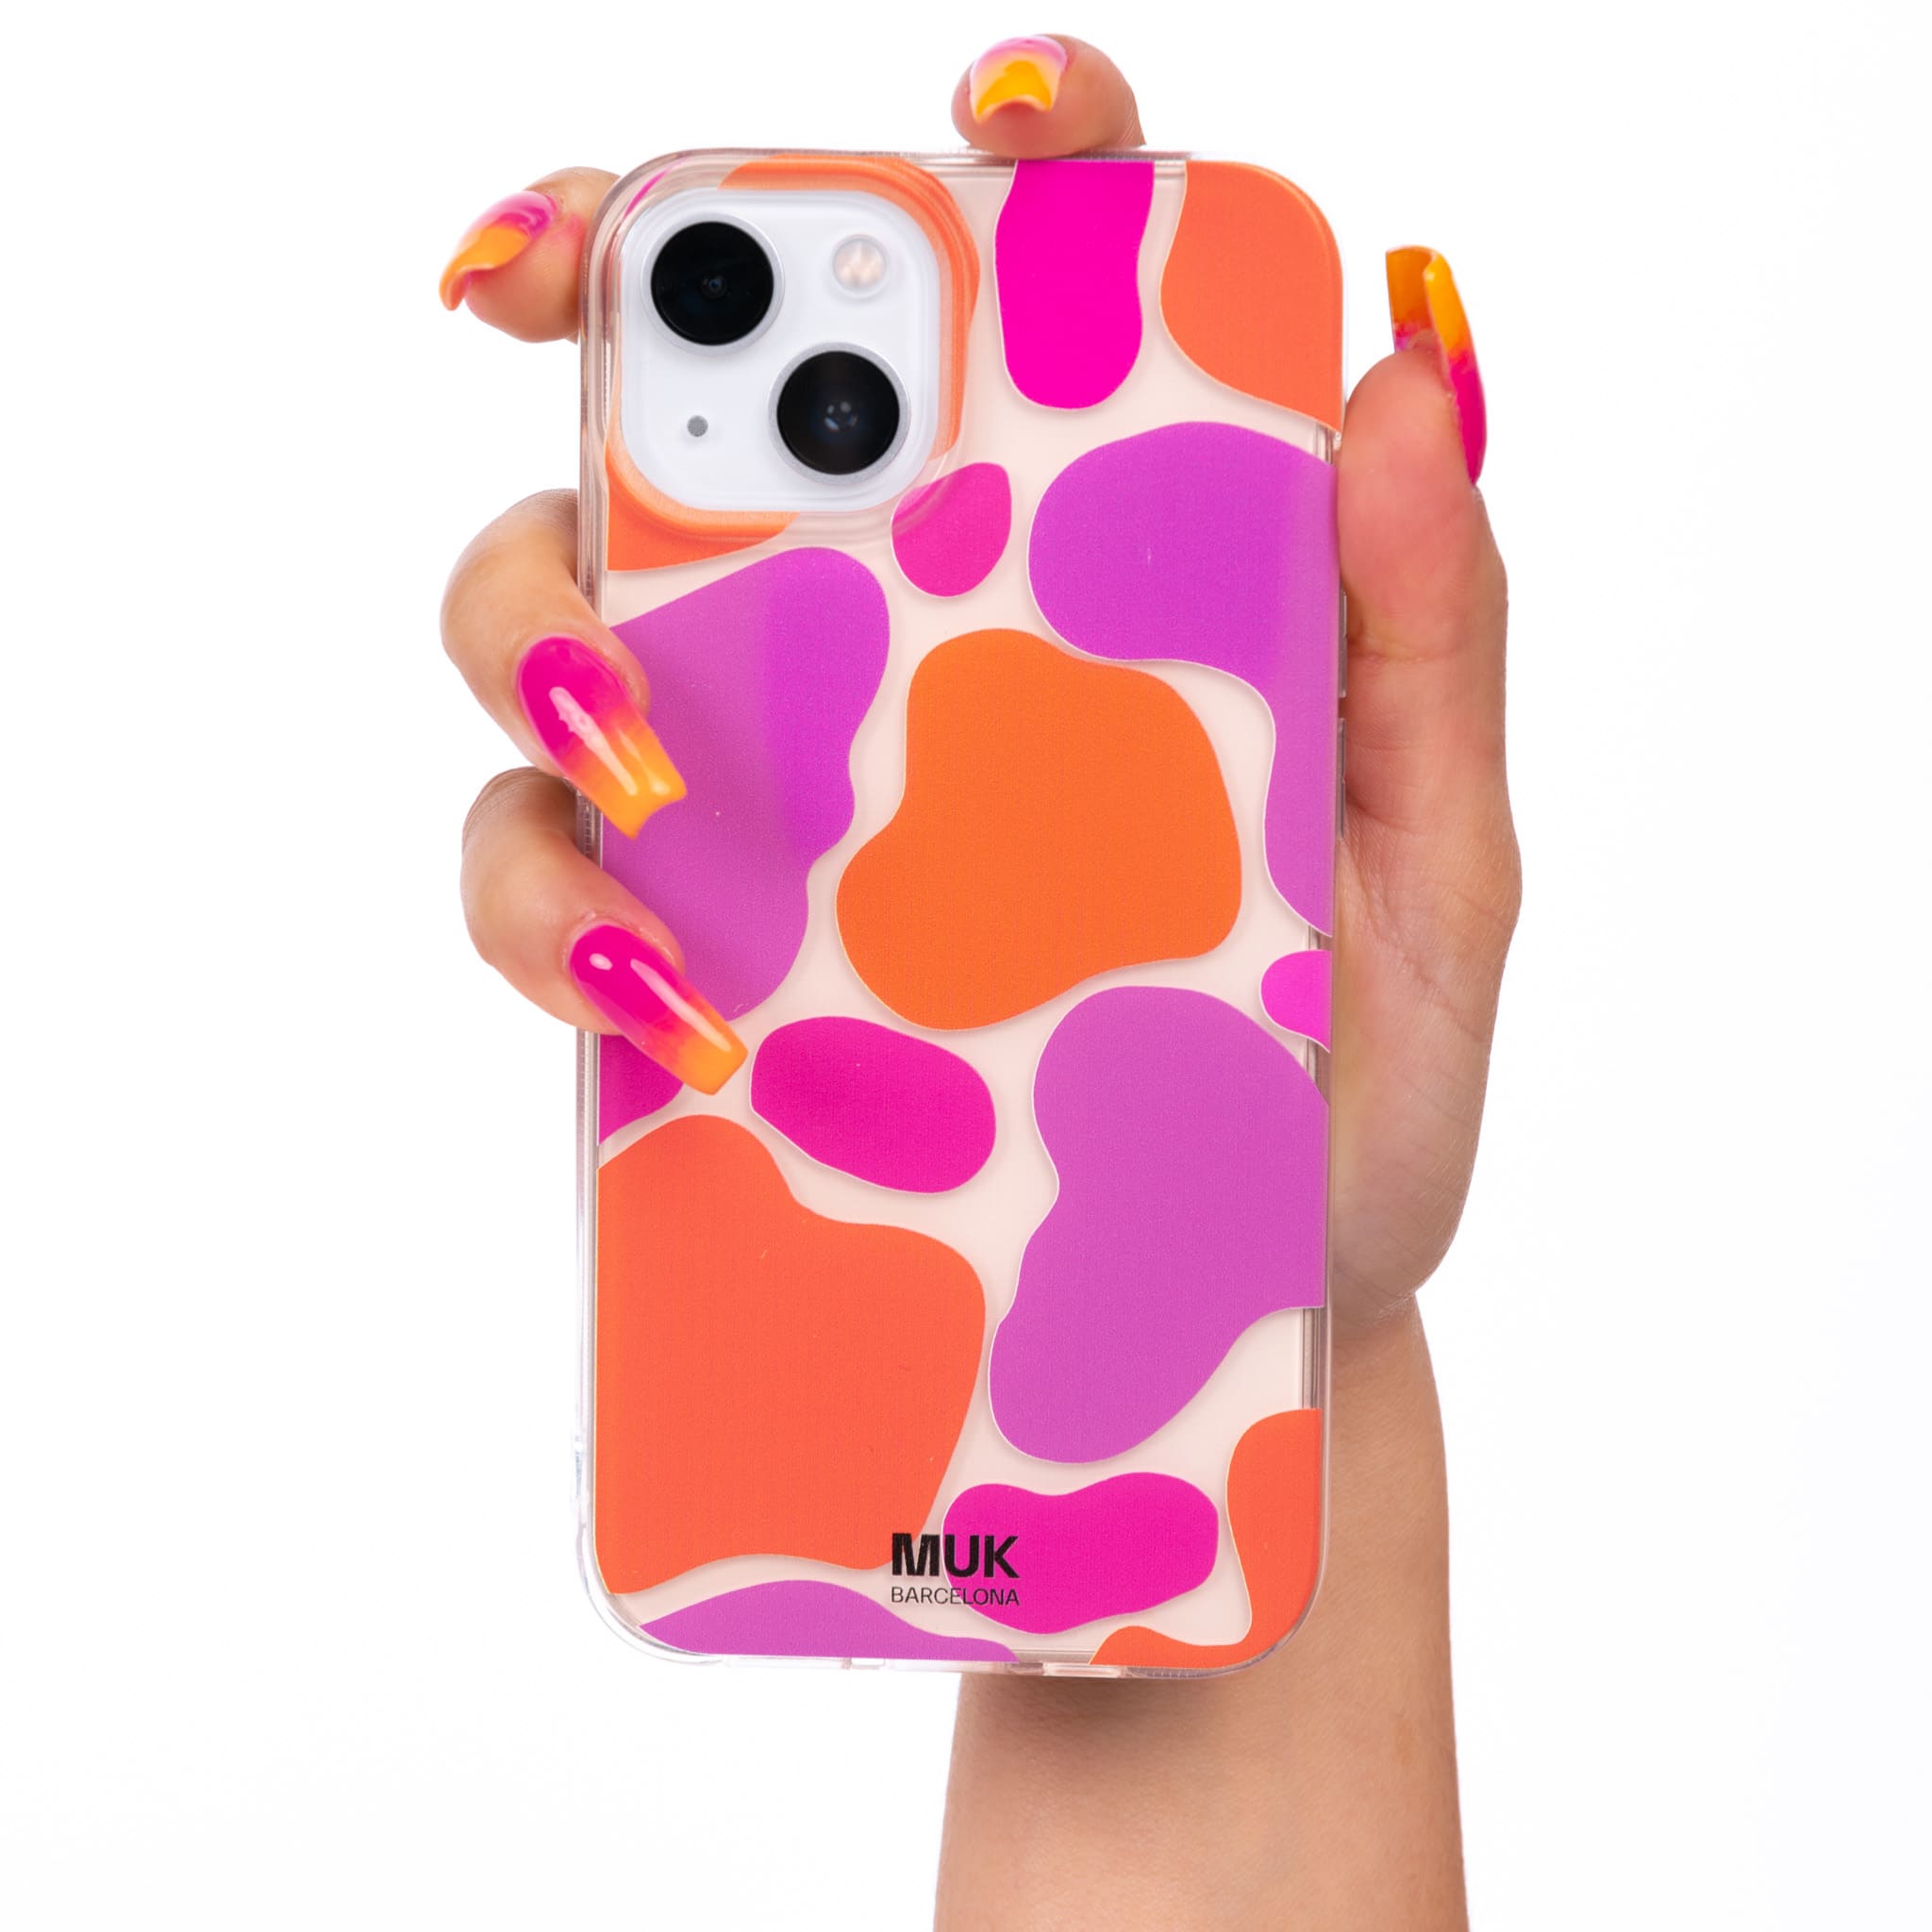 Cow in colors  Phone Case